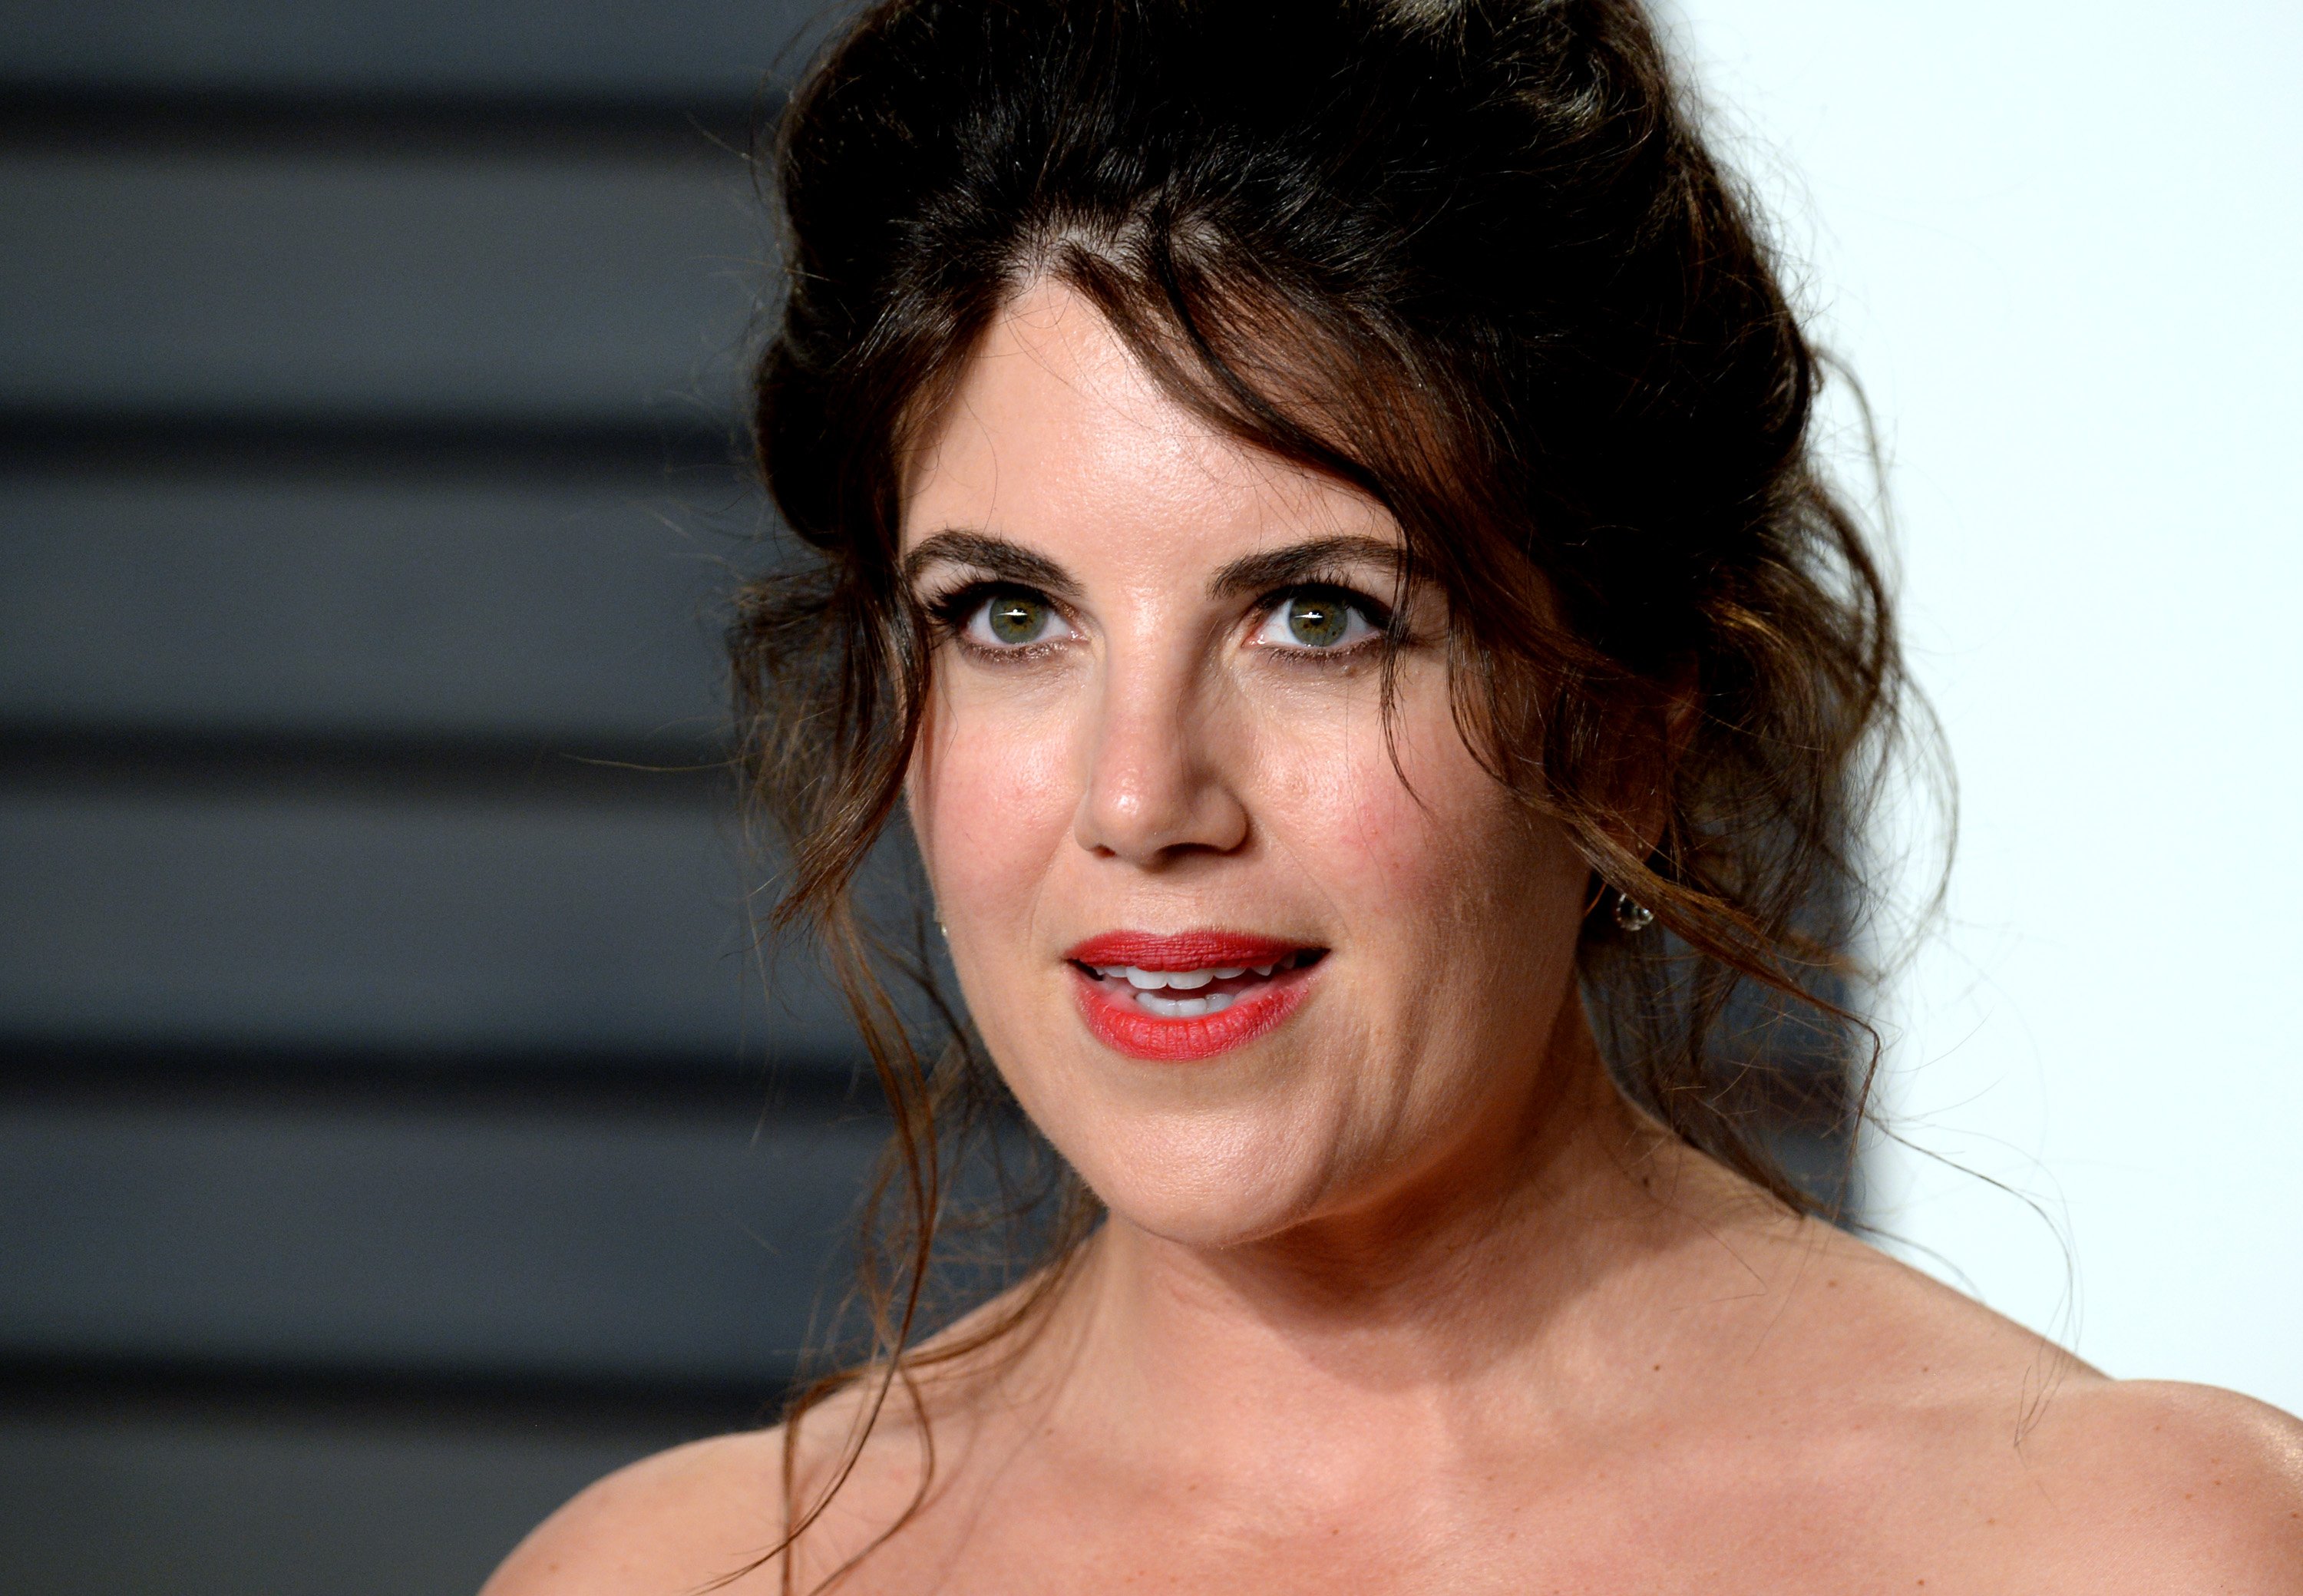 Television personality, activist, and Fashion designer, Monica Lewinsky | Photo: Getty Images